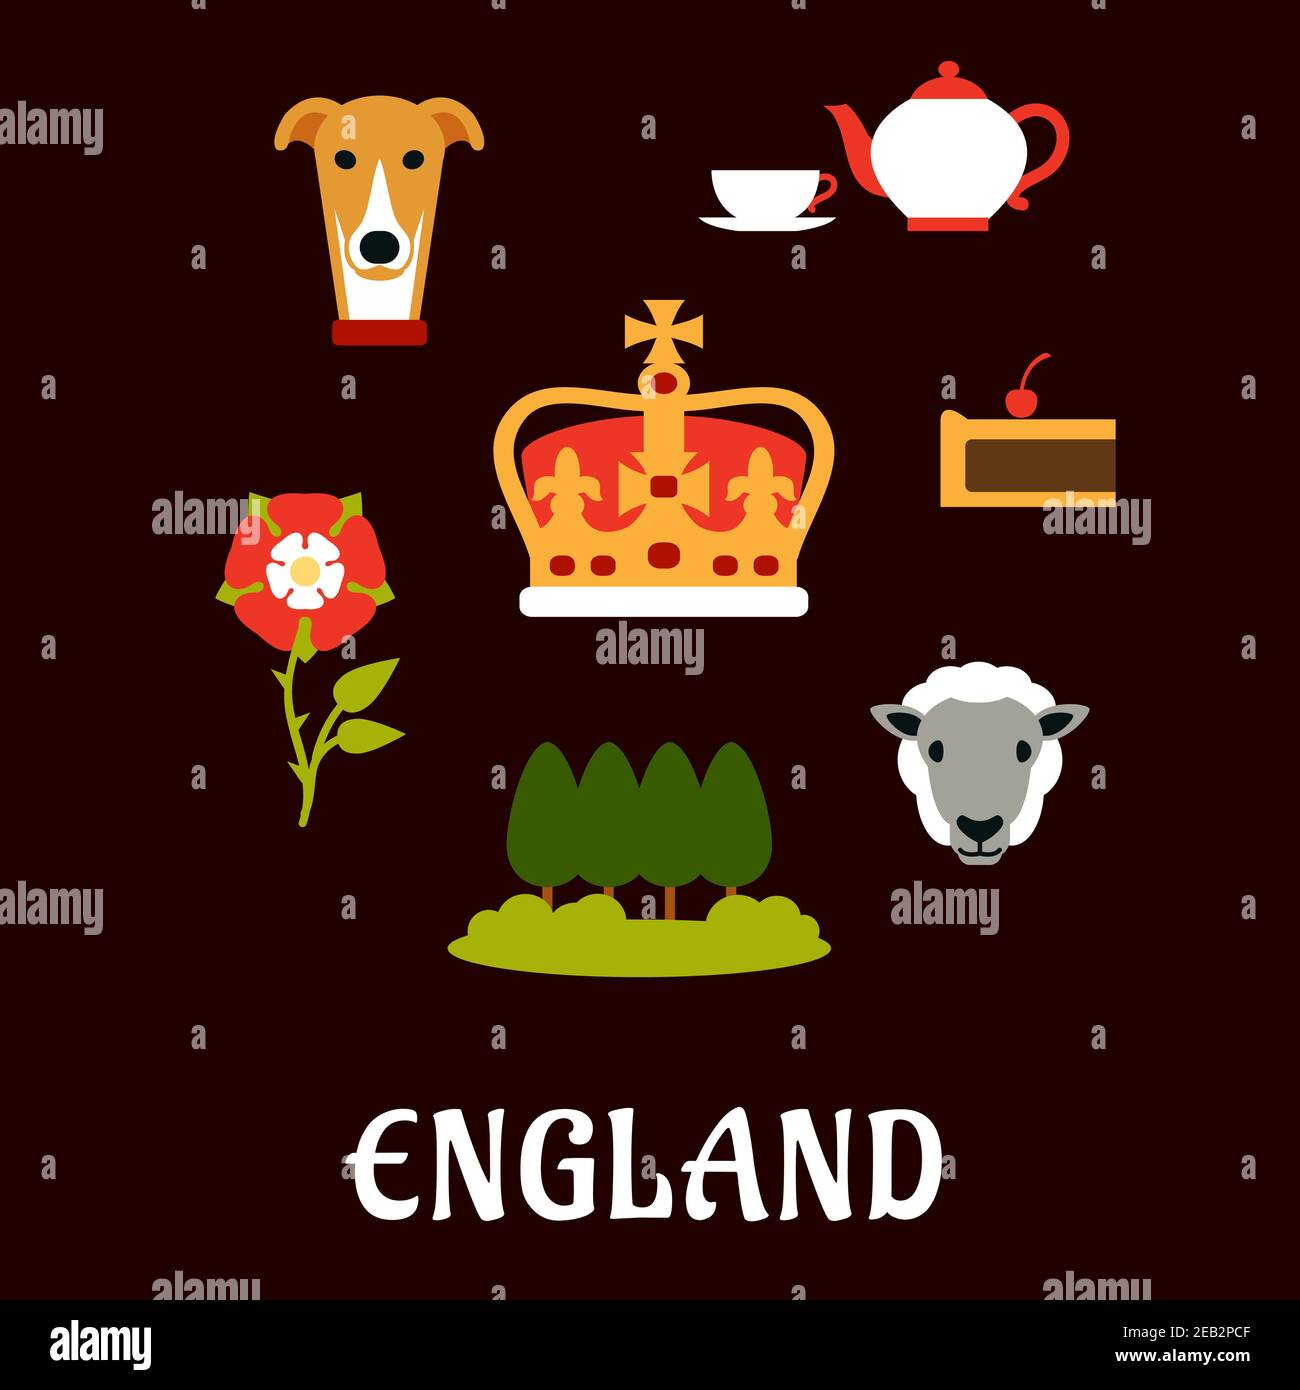 England traditional symbols flat icons with heraldic tudor rose, park landscape, royal dog, tea set, pie, sheep and Emperor crown Stock Vector